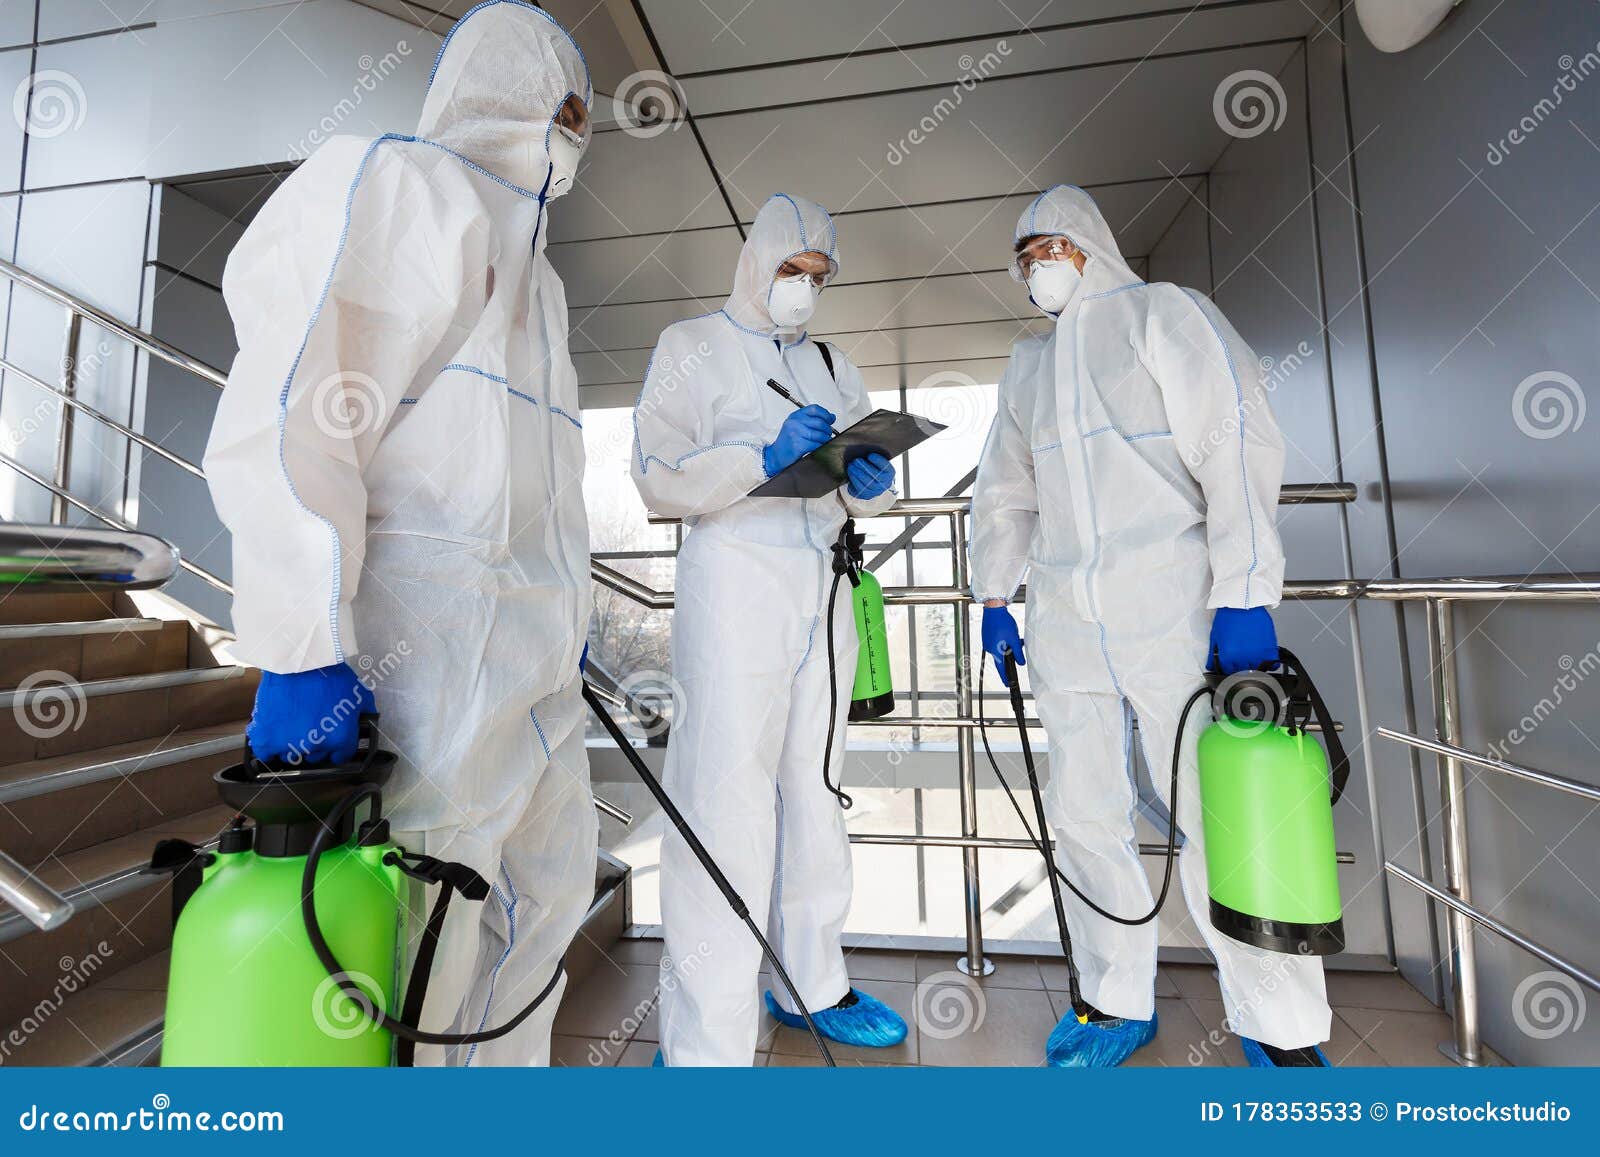 outdoor disinfection by cleaning workers in hazmat suits